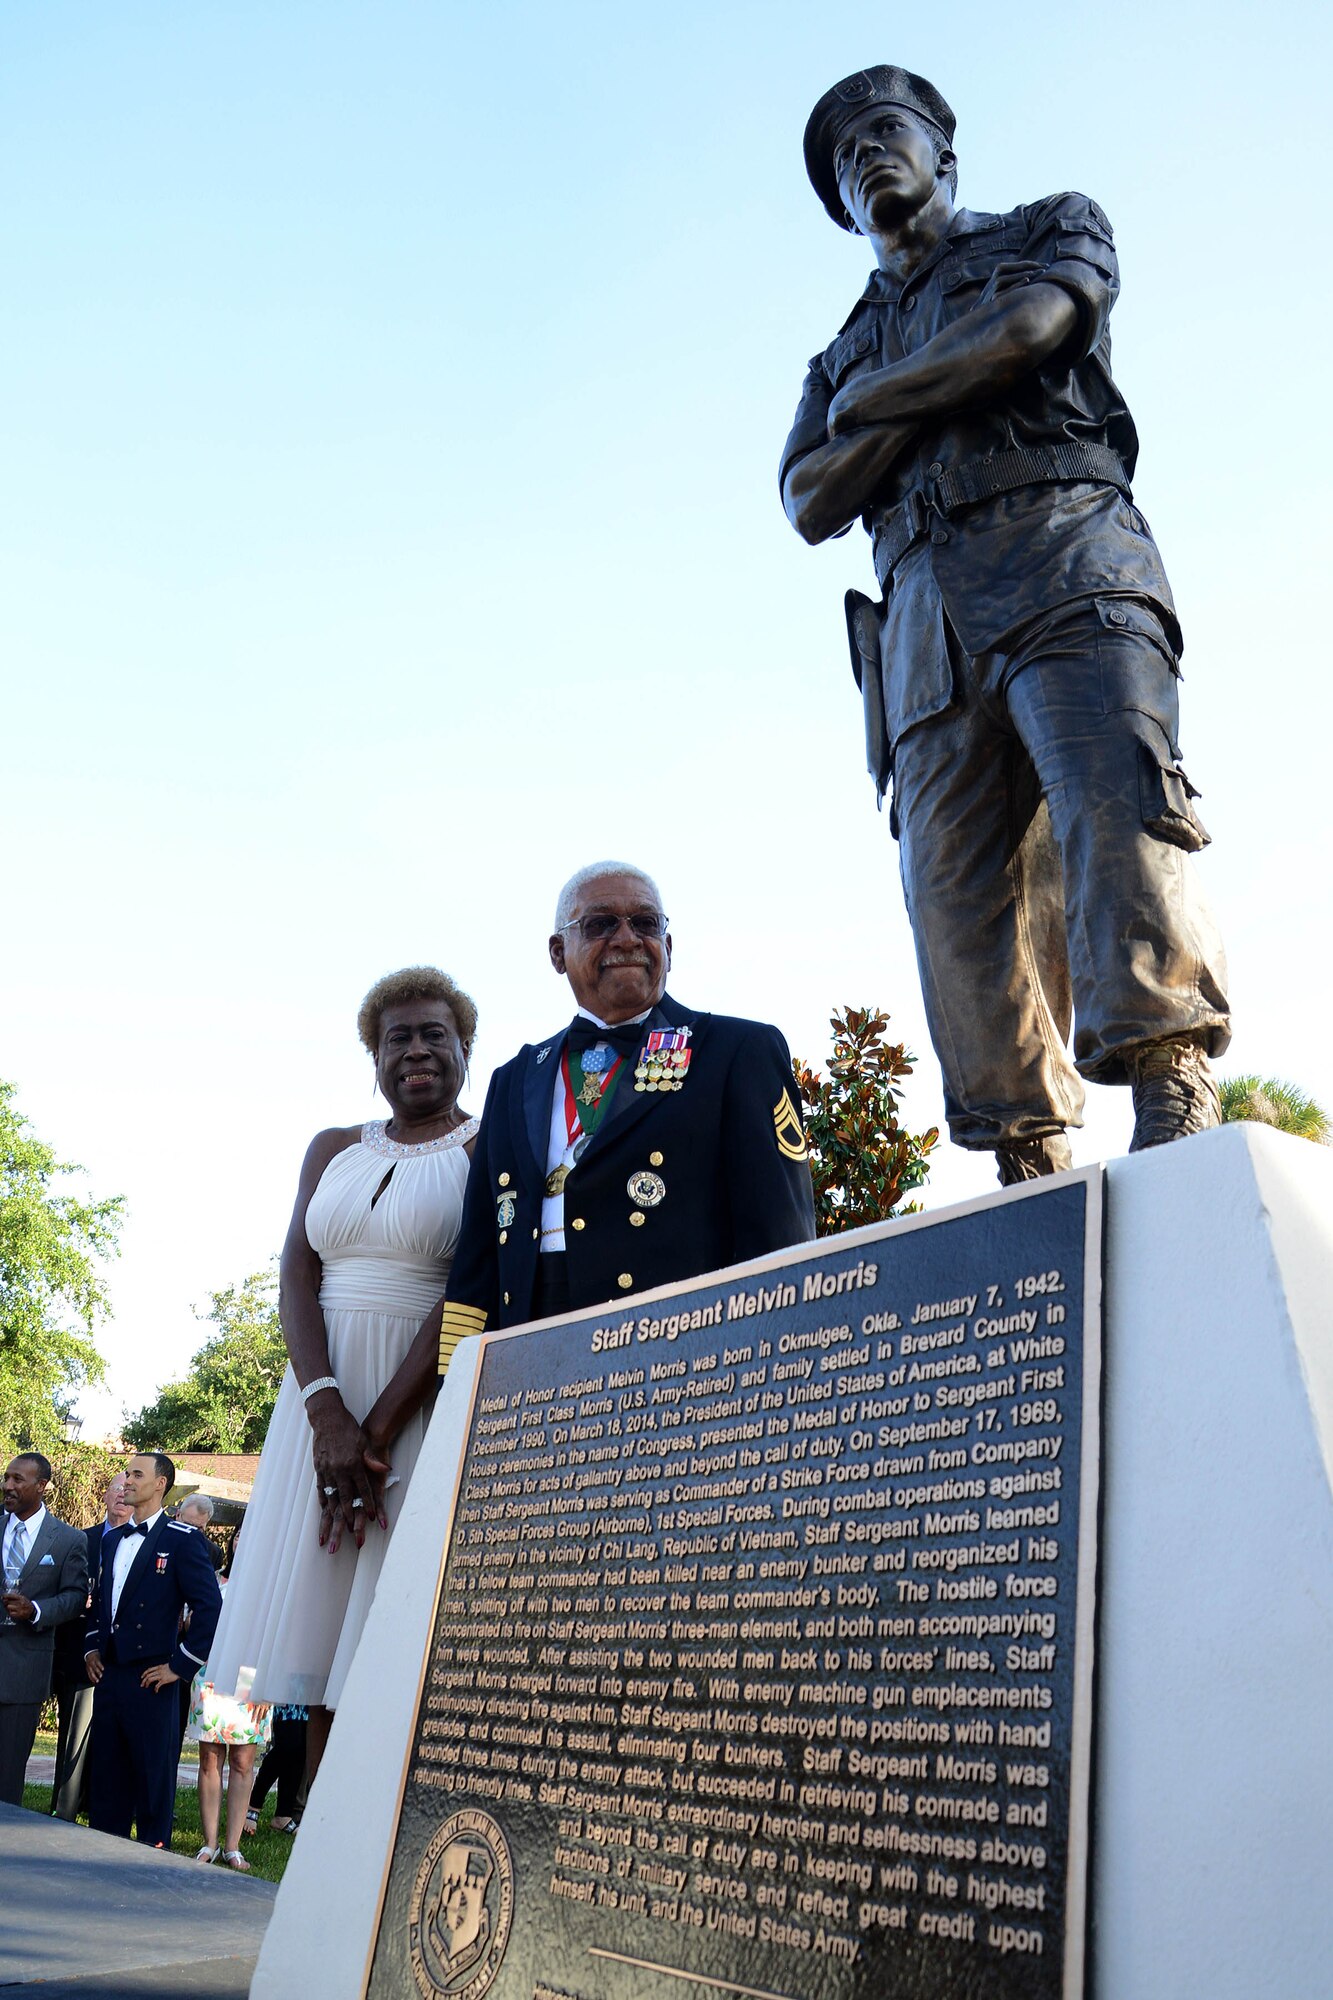 U.S. Army Sgt. 1st Class Melvin Morris, Medal of Honor recipient, his wife, Mary, stand next to a live-size bronze statue of himself; standing arms crossed, in his 1960's era Army fatigues during a ceremony, which included an unveiling, May 14, 2015, at Riverfront Park in Cocoa, Fla. The President, in the name of Congress, has awarded more than 3,400 Medals of Honor to our nation's bravest Soldiers, Sailors, Airmen, Marines, and Coast Guardsmen since the decoration's creation in 1861. (Photo courtesy/Florida Today)